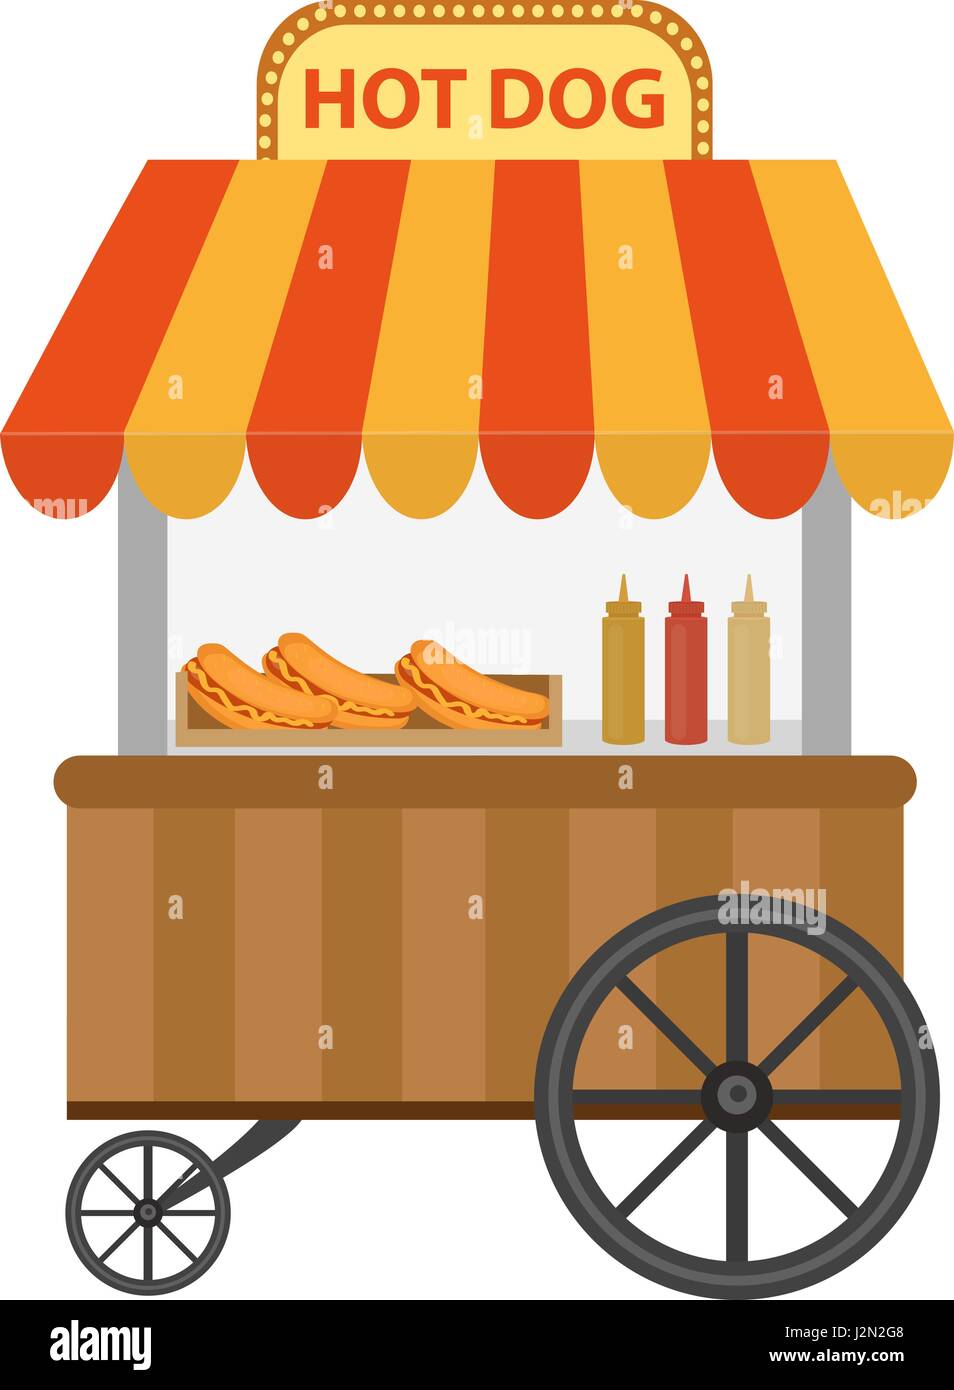 Hot dog street shop, cart. icon flat, cartoon style. Fast food concept isolated on white background. Vector illustration, clip-art. Stock Vector